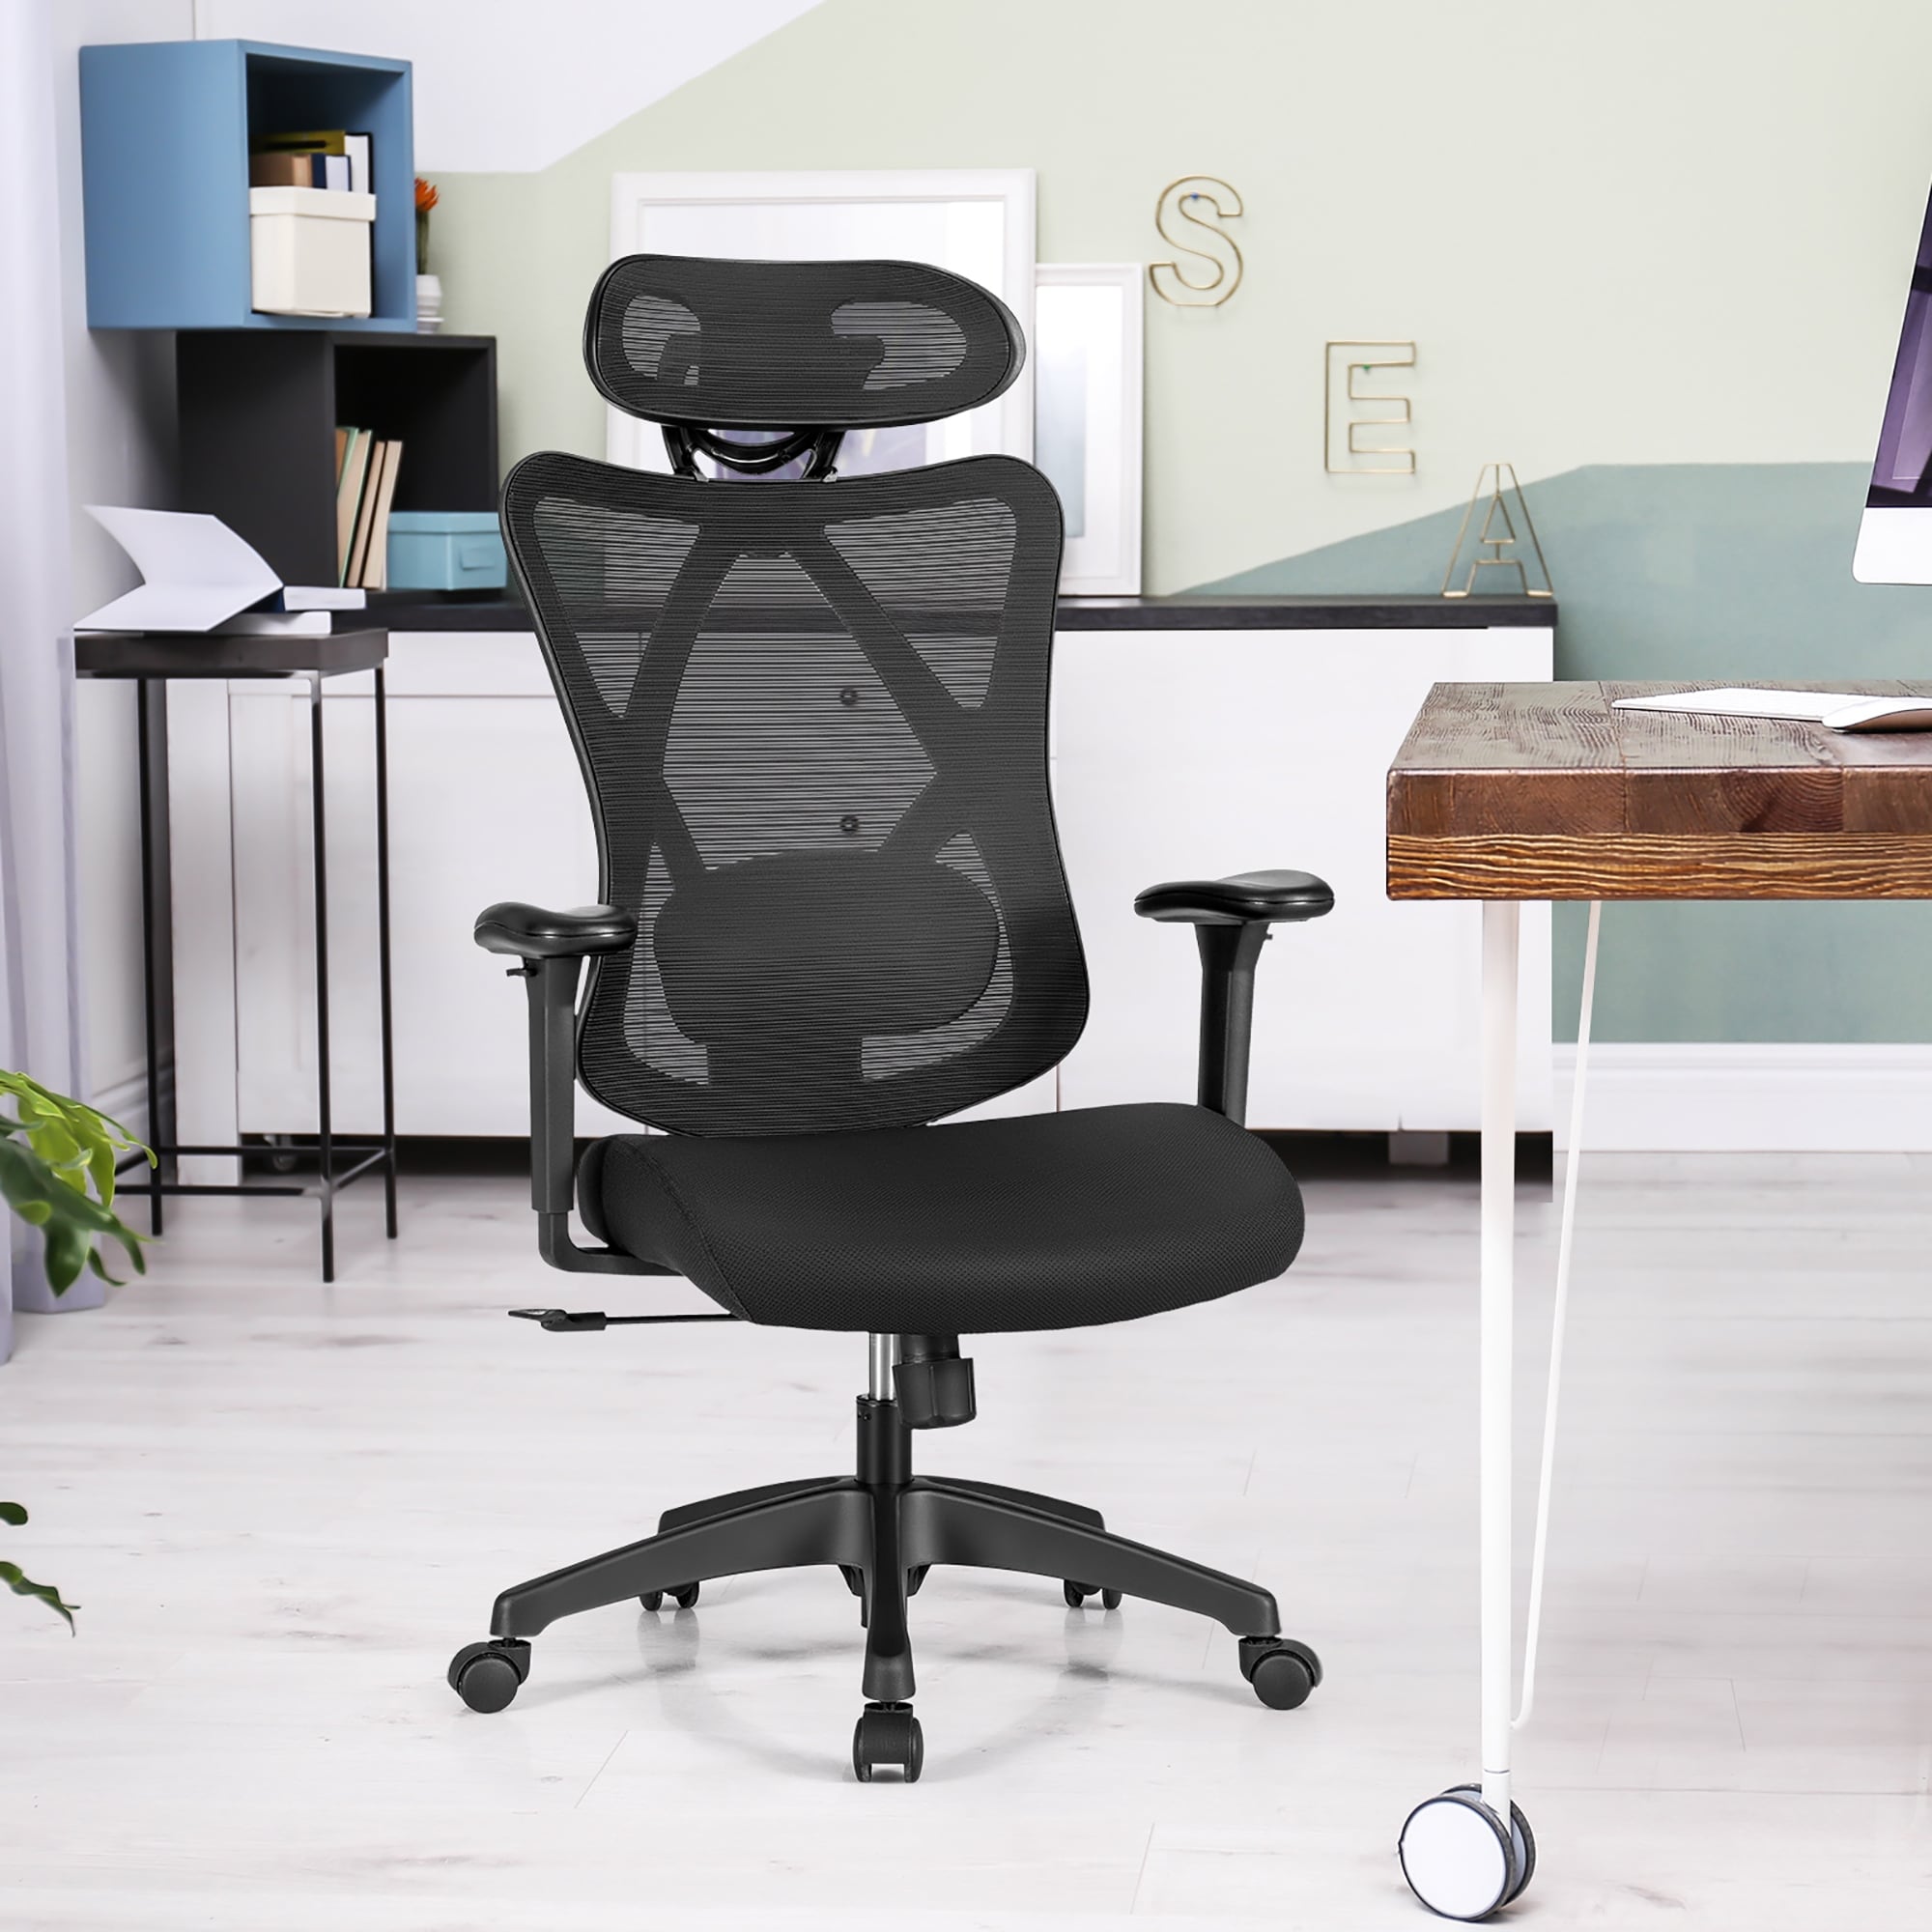 https://ak1.ostkcdn.com/images/products/is/images/direct/fb1a1b5d14e46da46e31244483d136d3ed8e725c/Costway-Ergonomic-High-Back-Mesh-Office-Chair-w--Adjustable-Lumbar.jpg